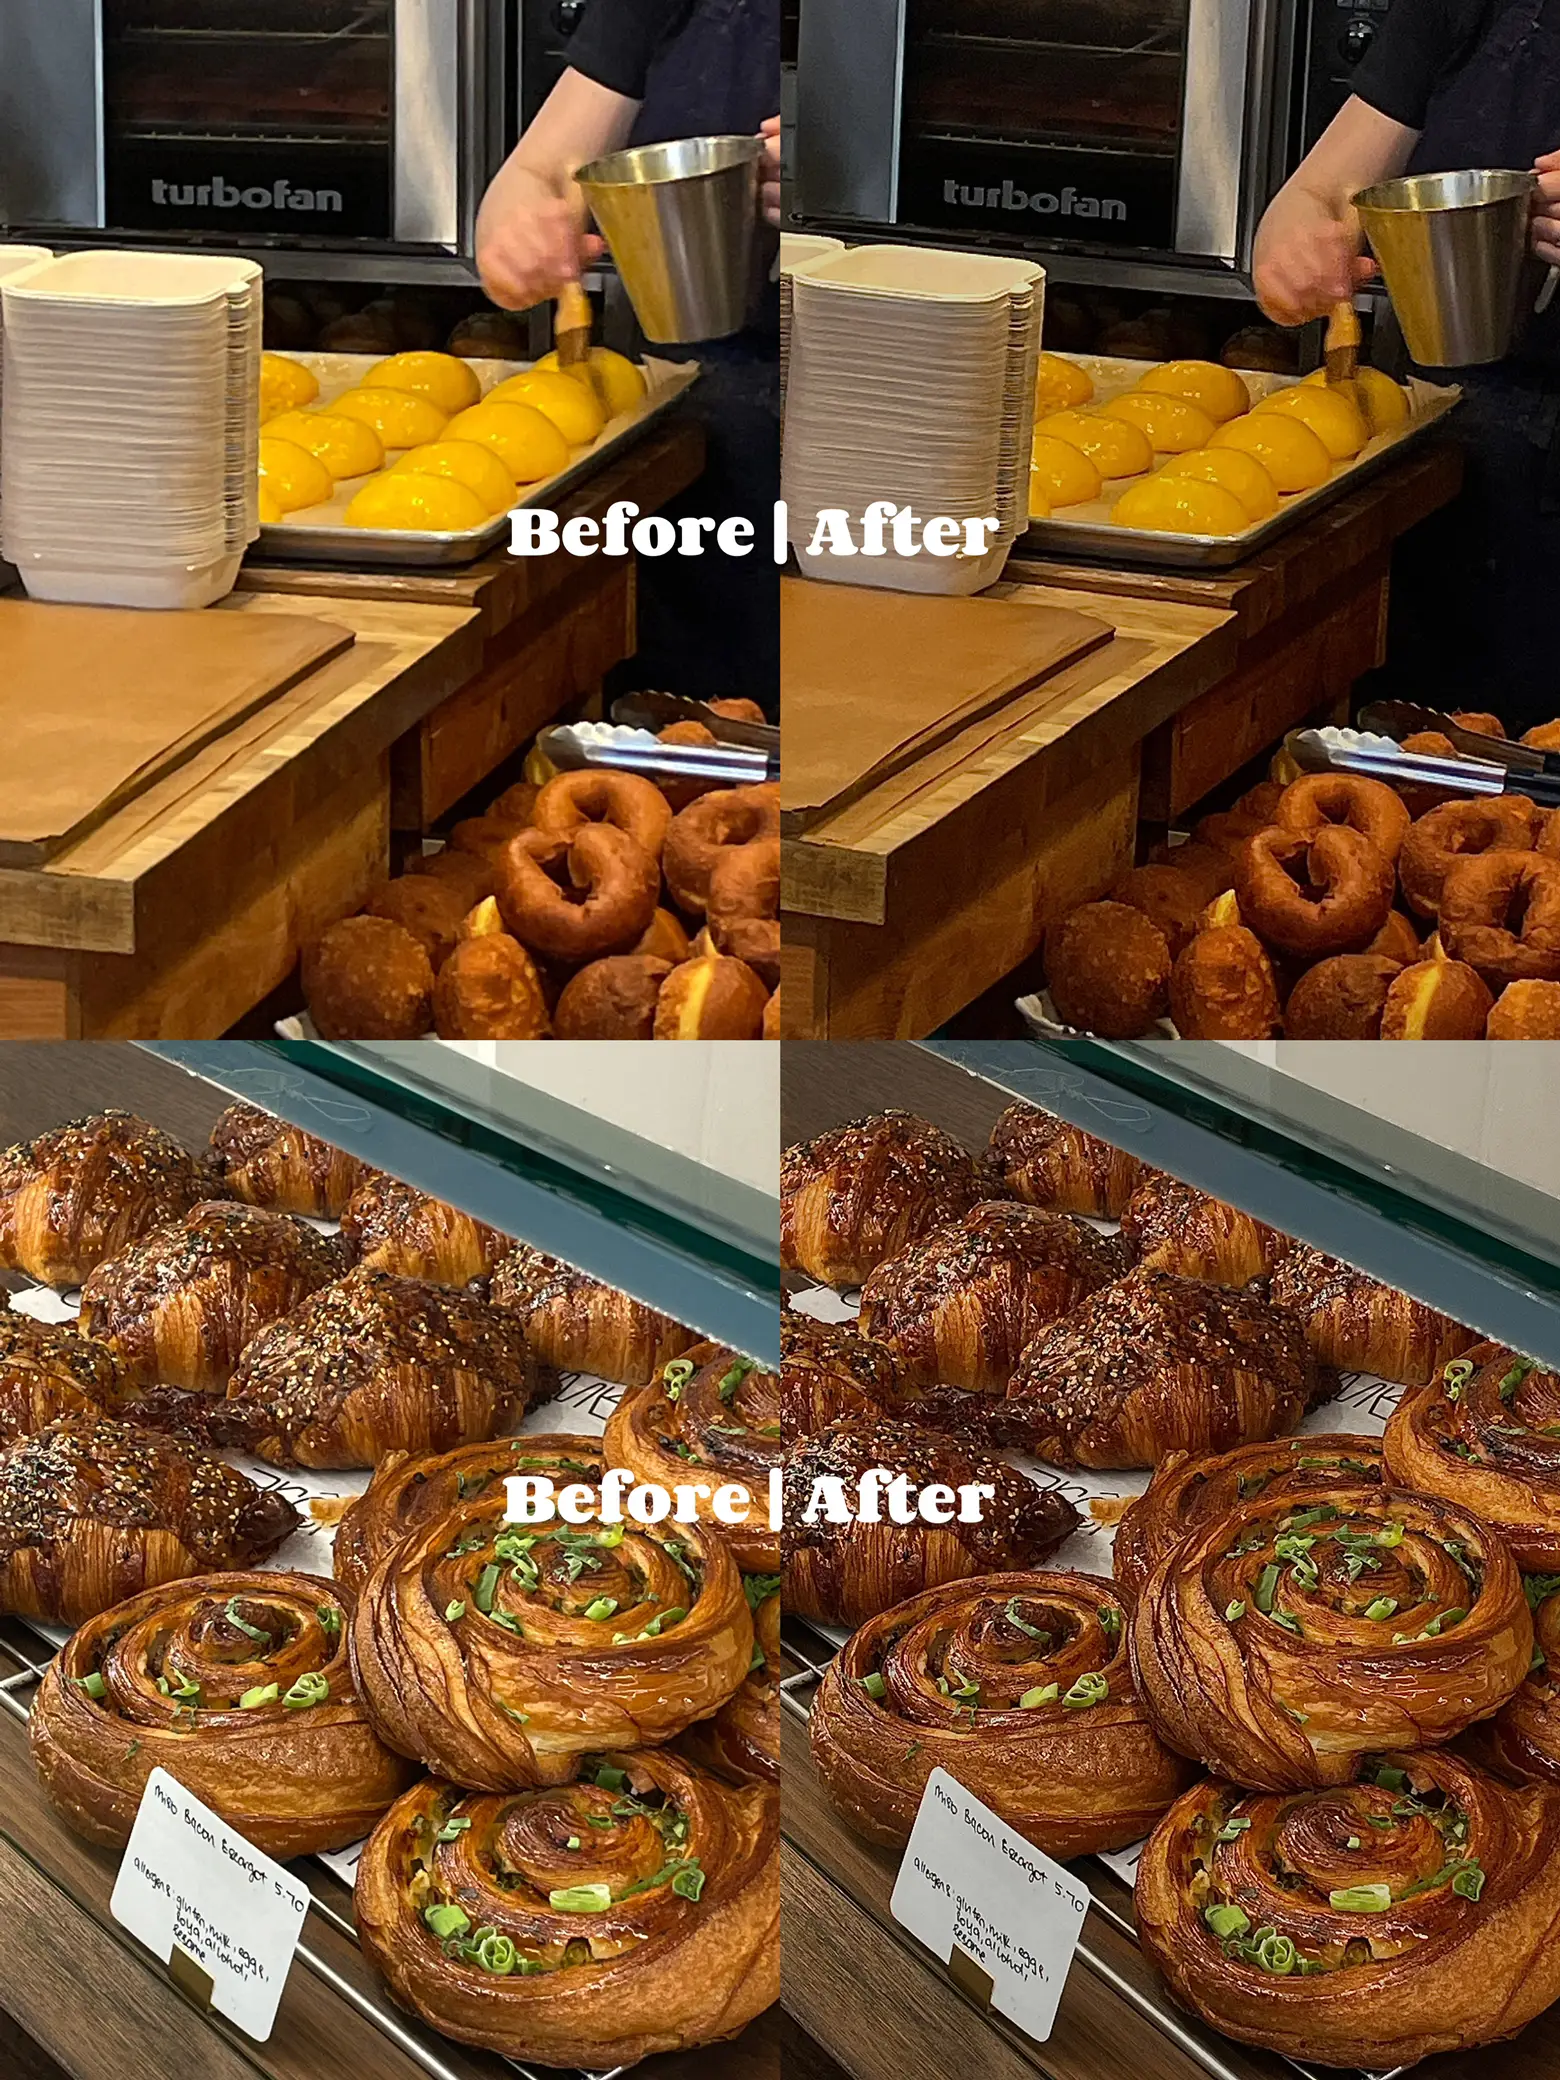  A collage of images showing a person holding a bowl of food and a pile of doughnuts. The images are labeled with the words "before" and "after"